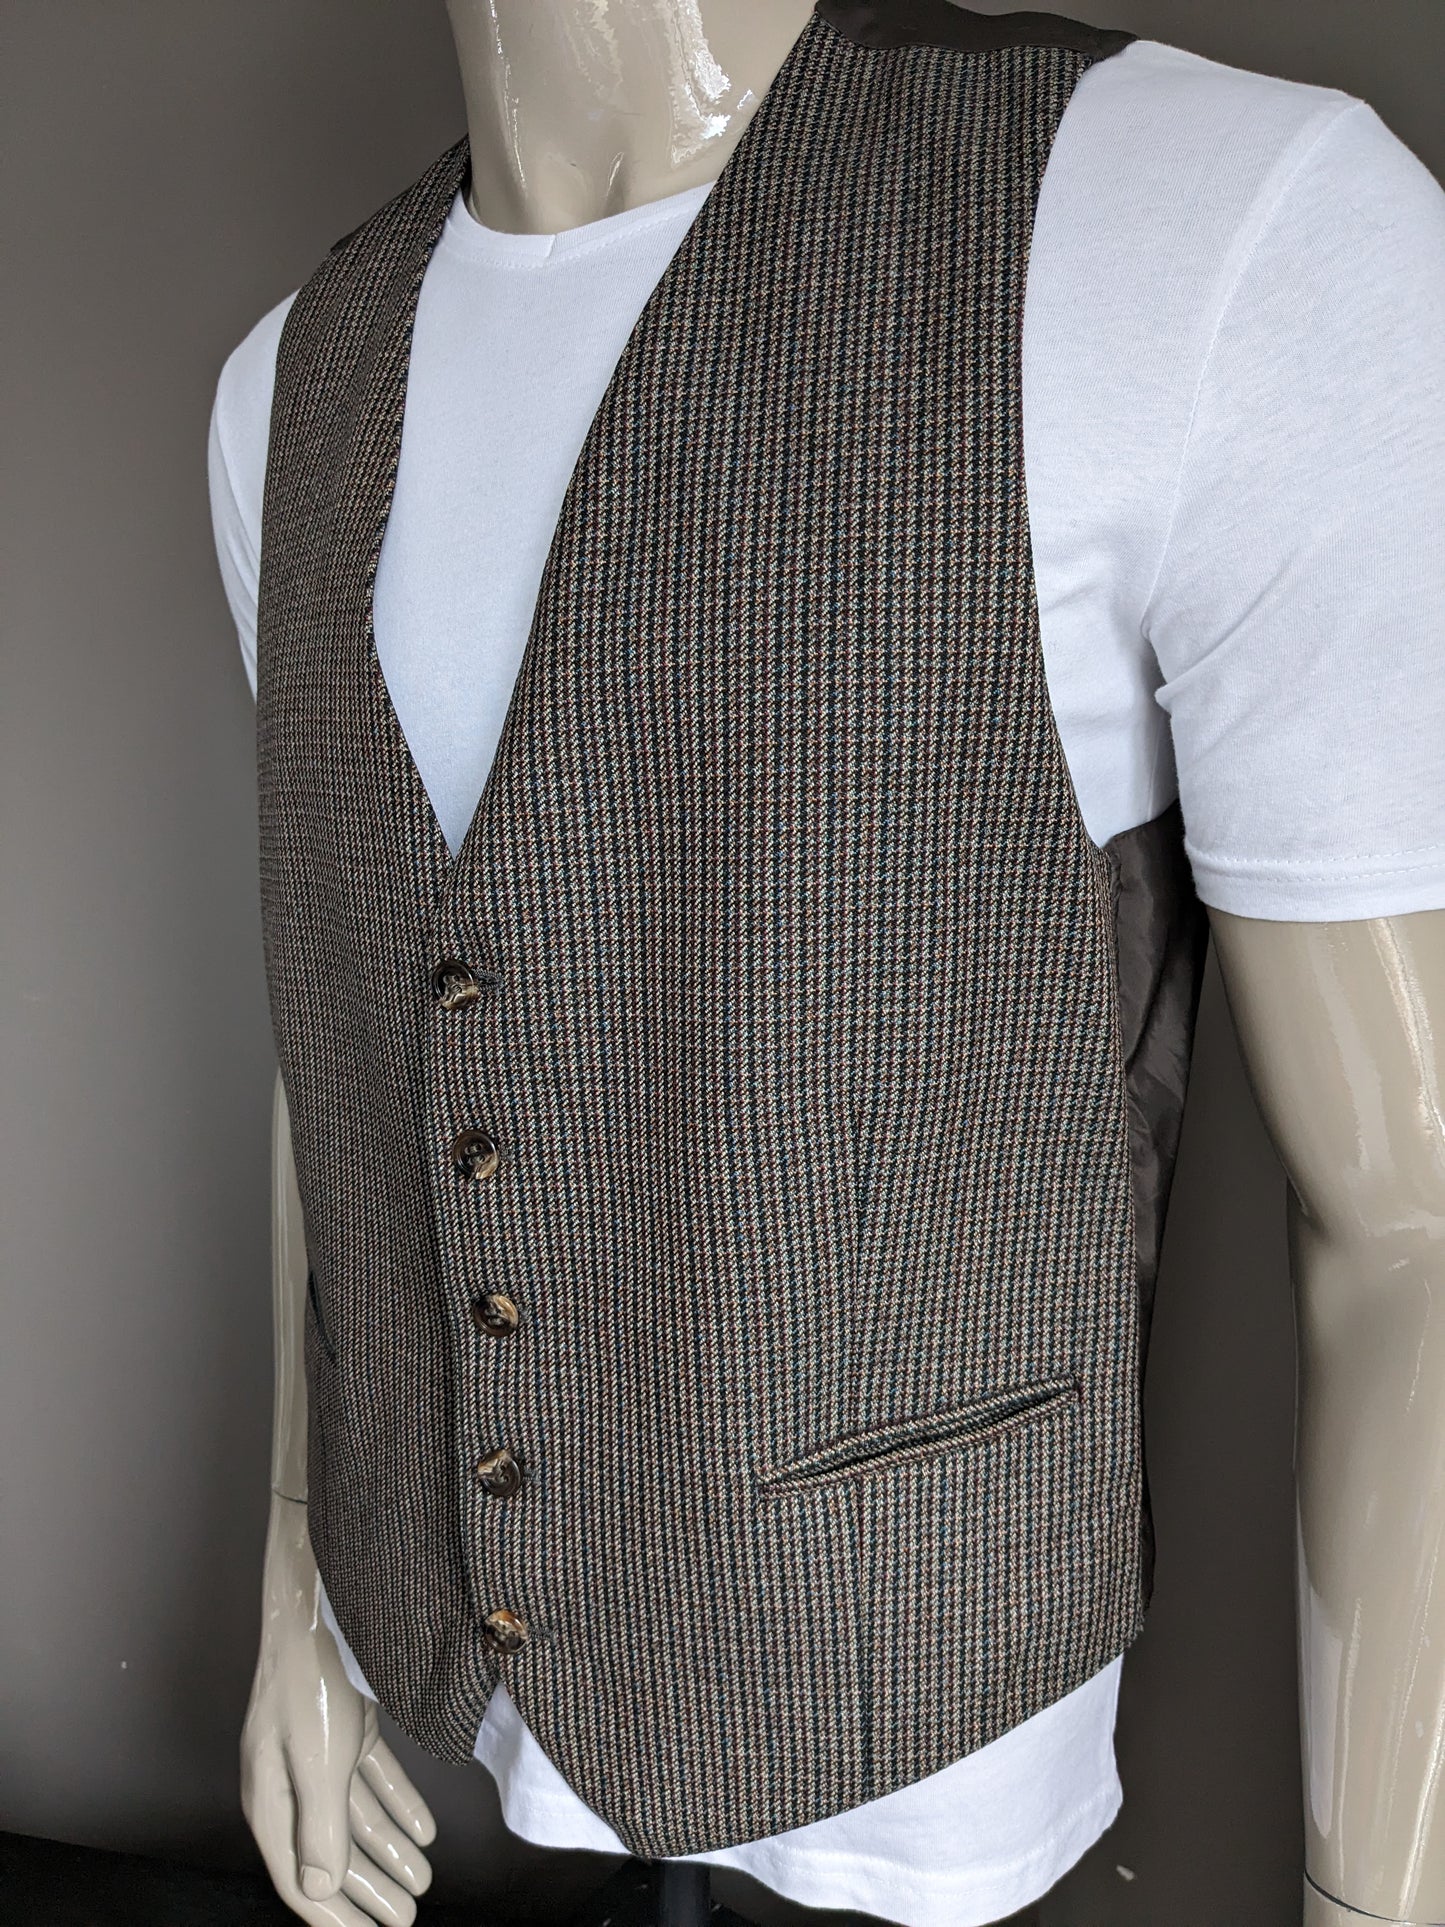 Waistcoat. Brown black checked with blue red green dots. Size L.